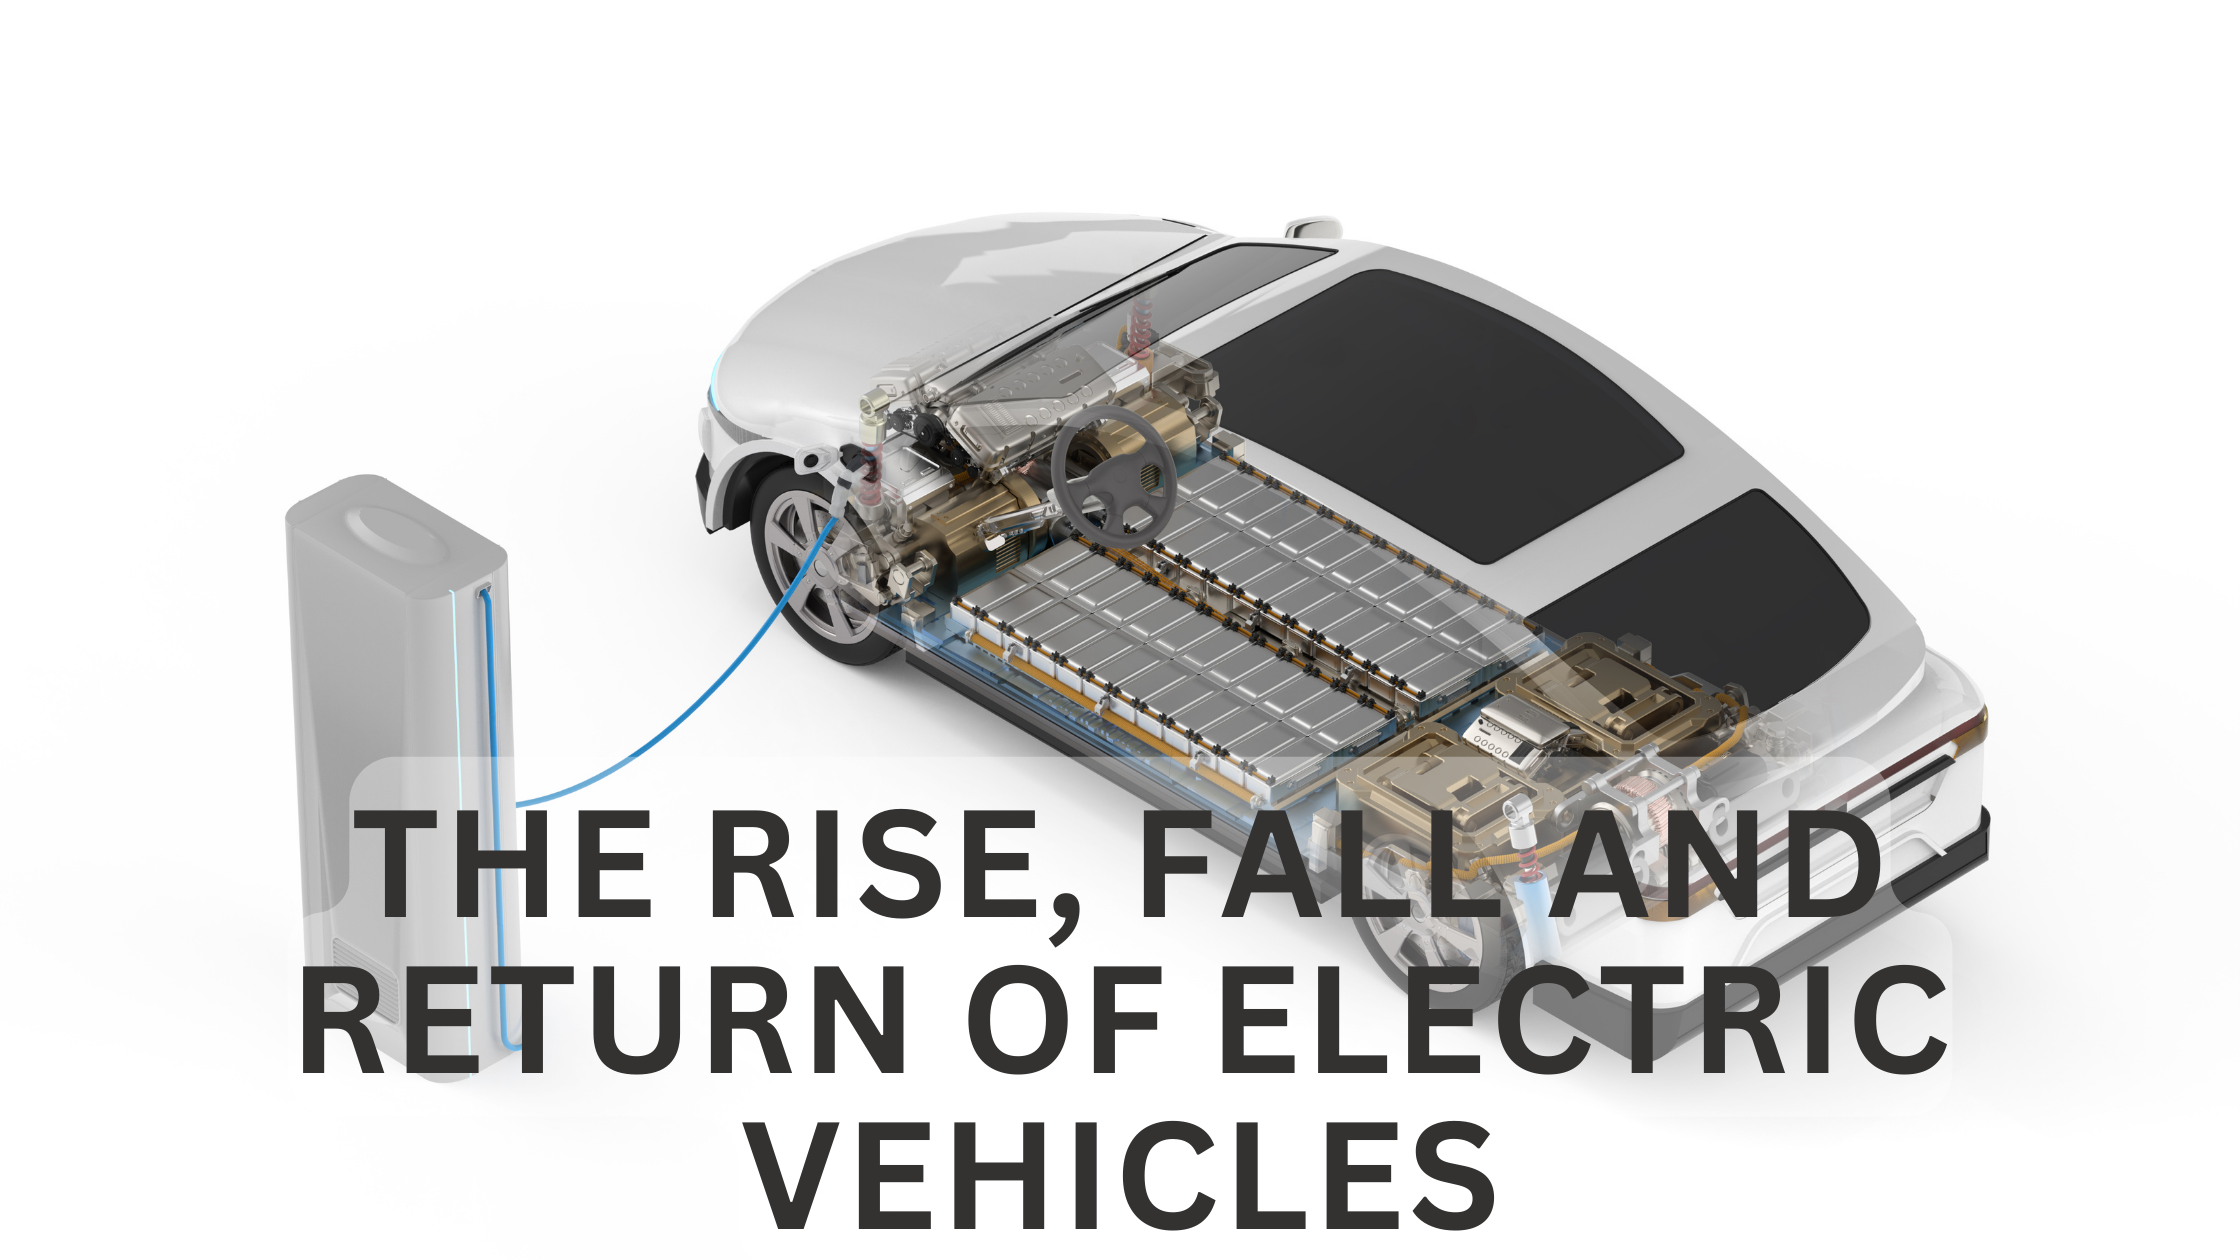 The Rise, Fall and Return of Electric Vehicles